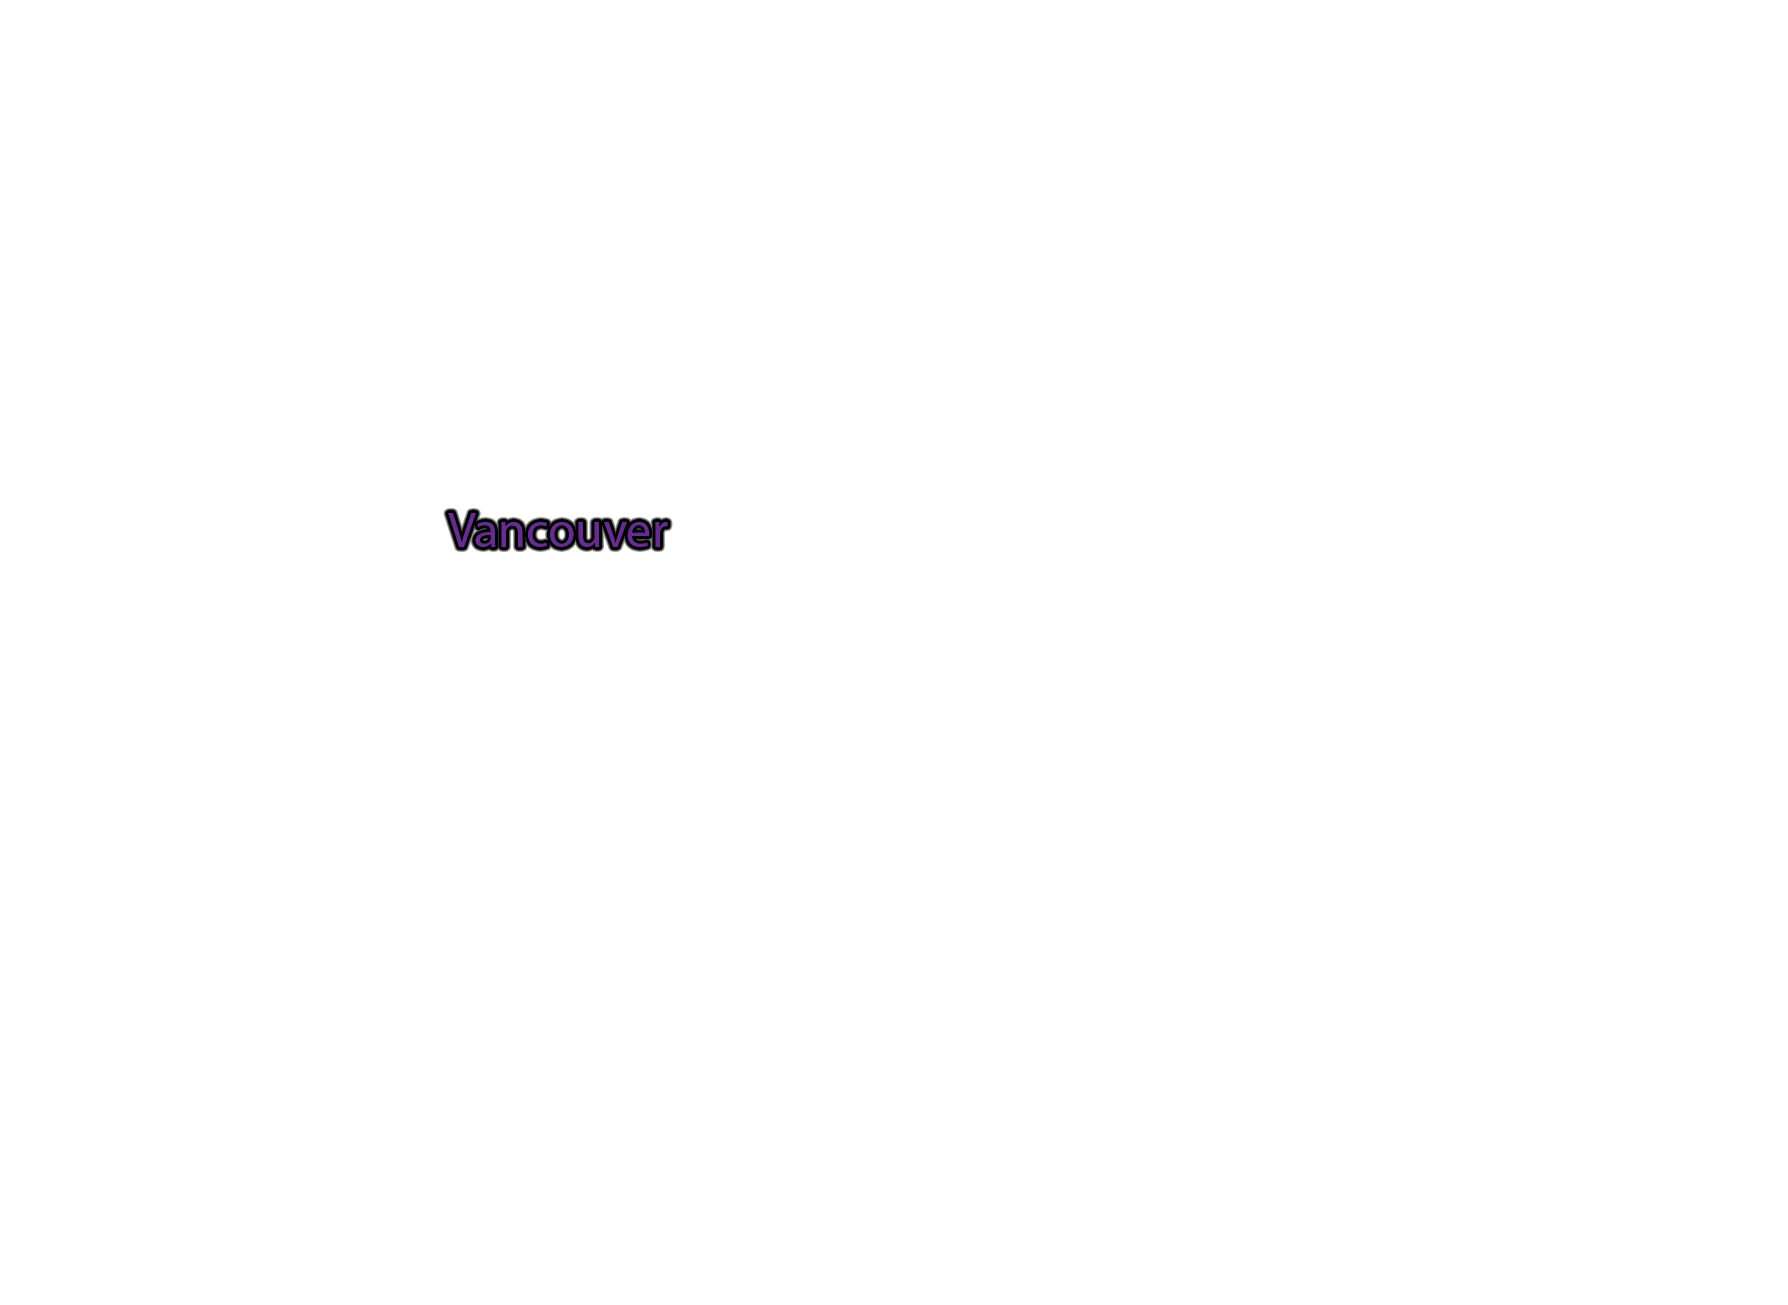 Vancouver label with glow